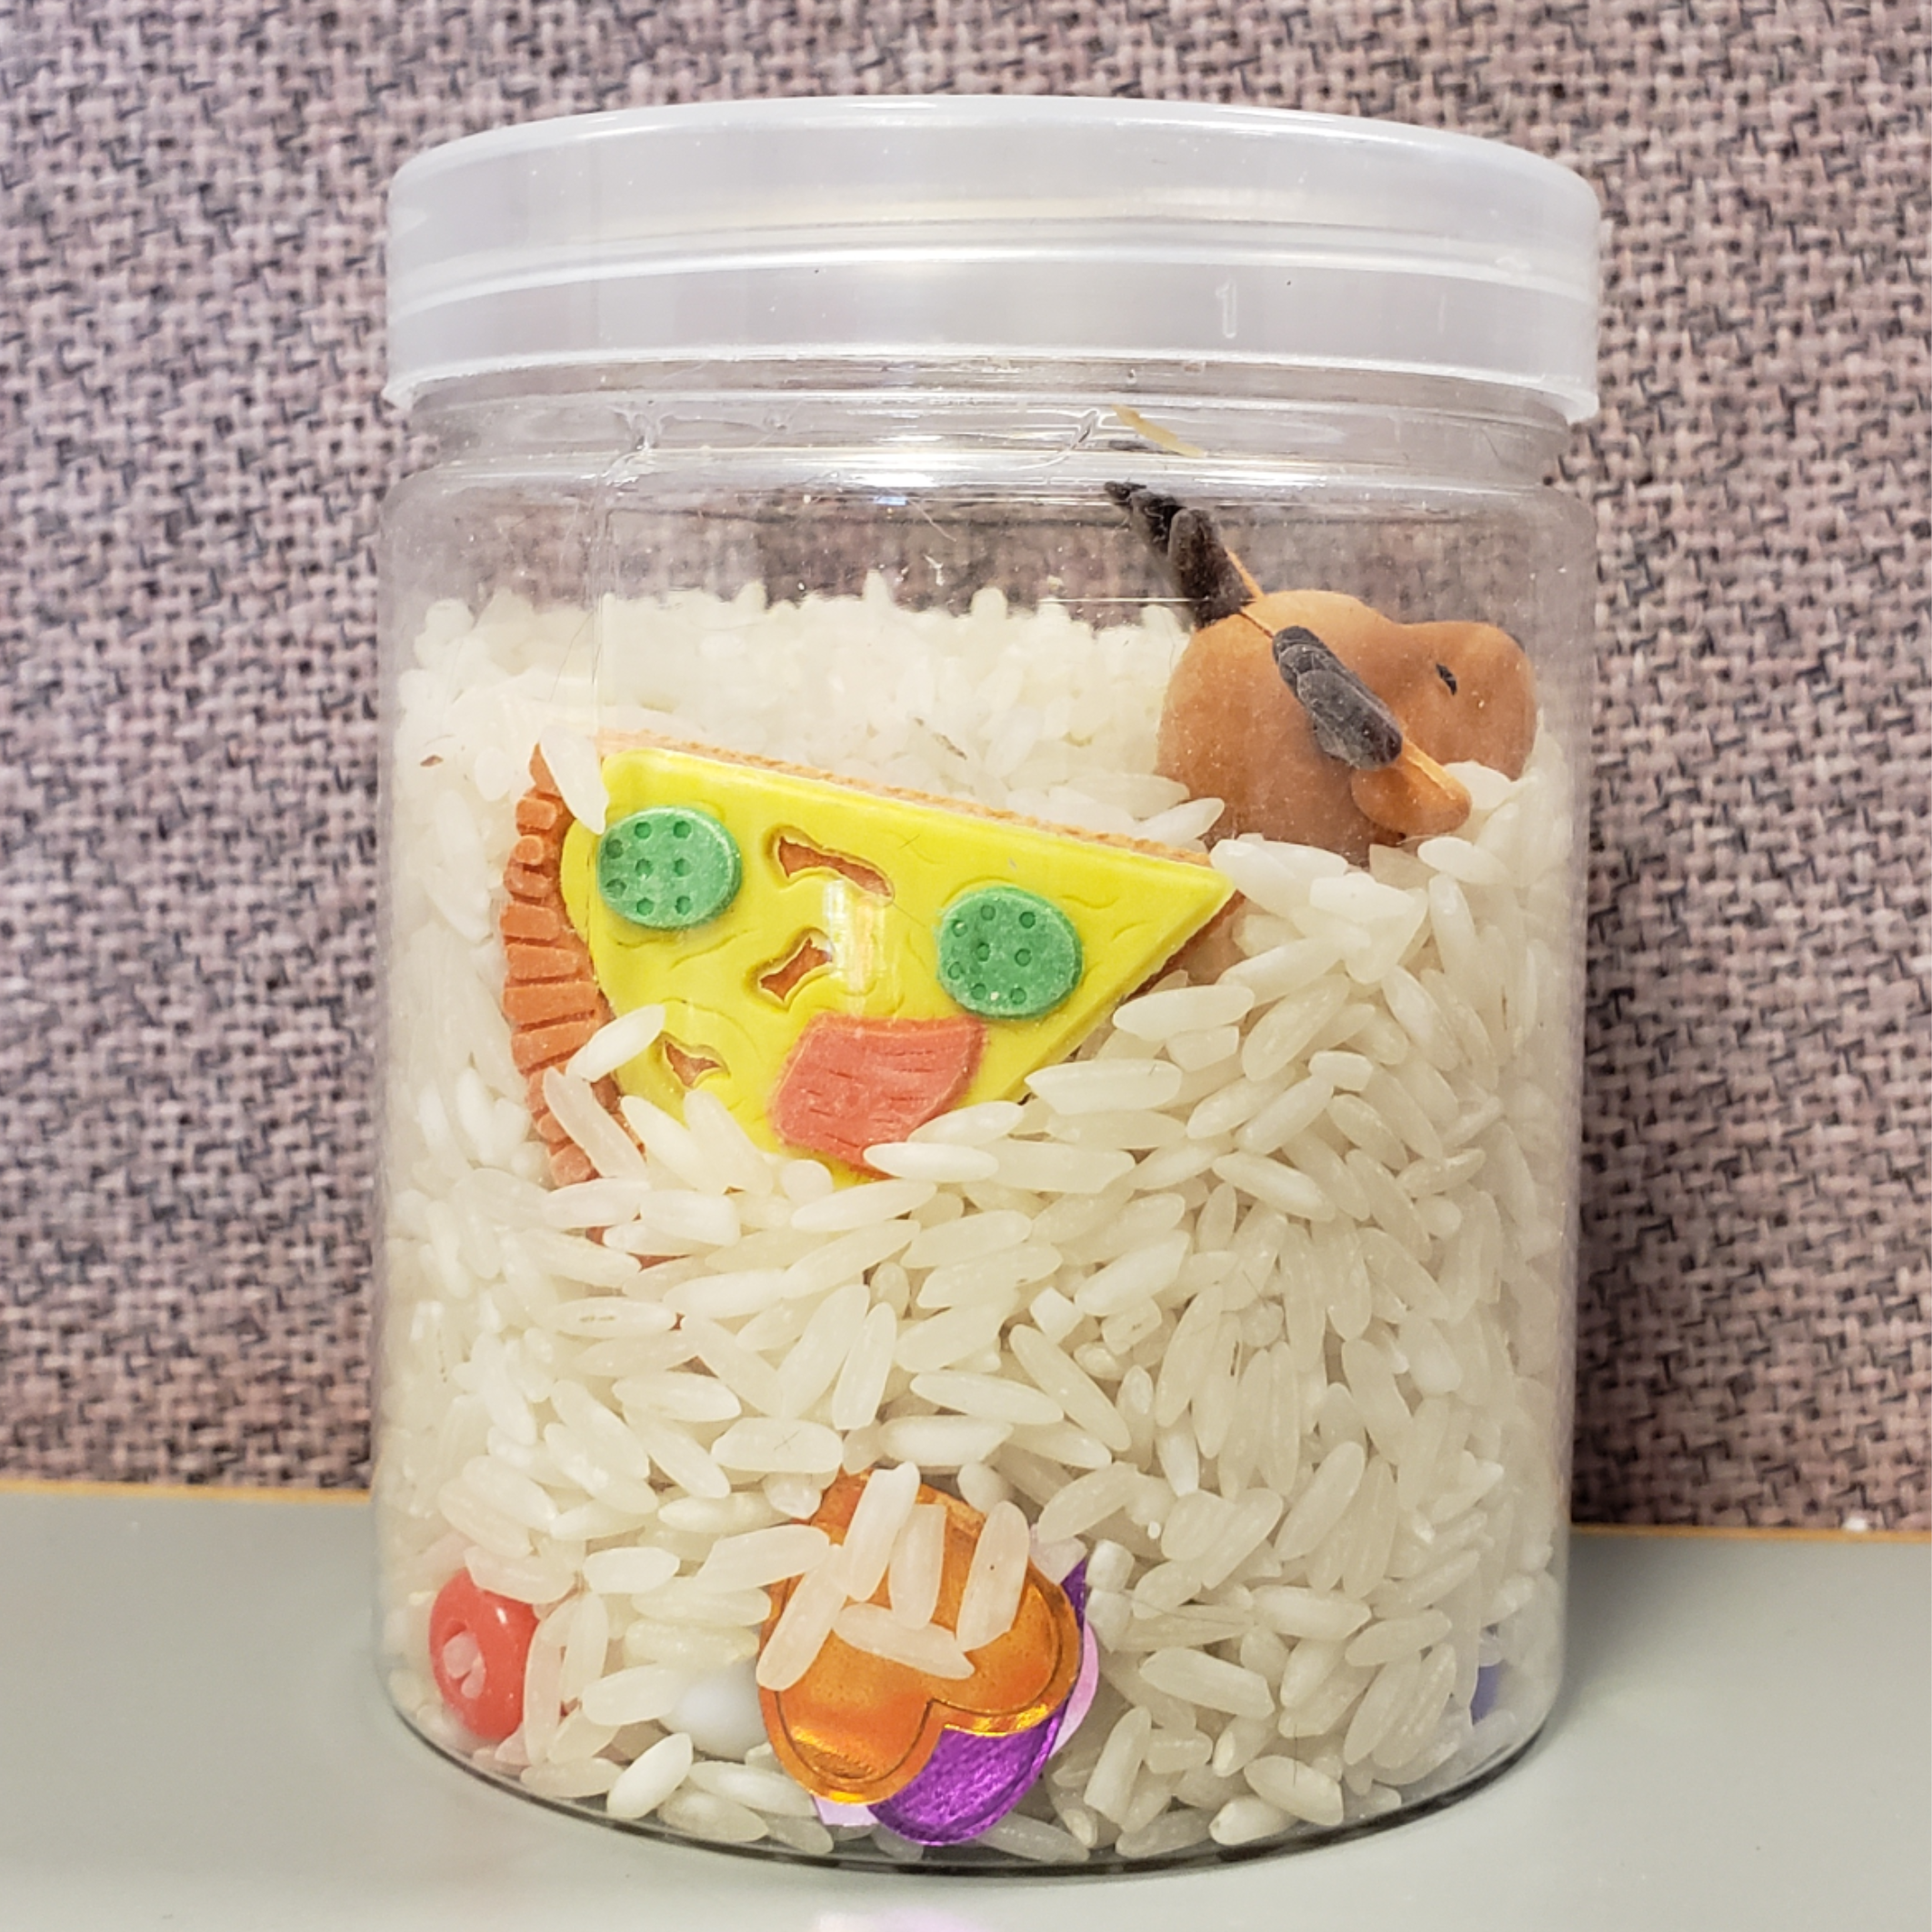 I-Spy shaker: See-through jar with rice and small objects 